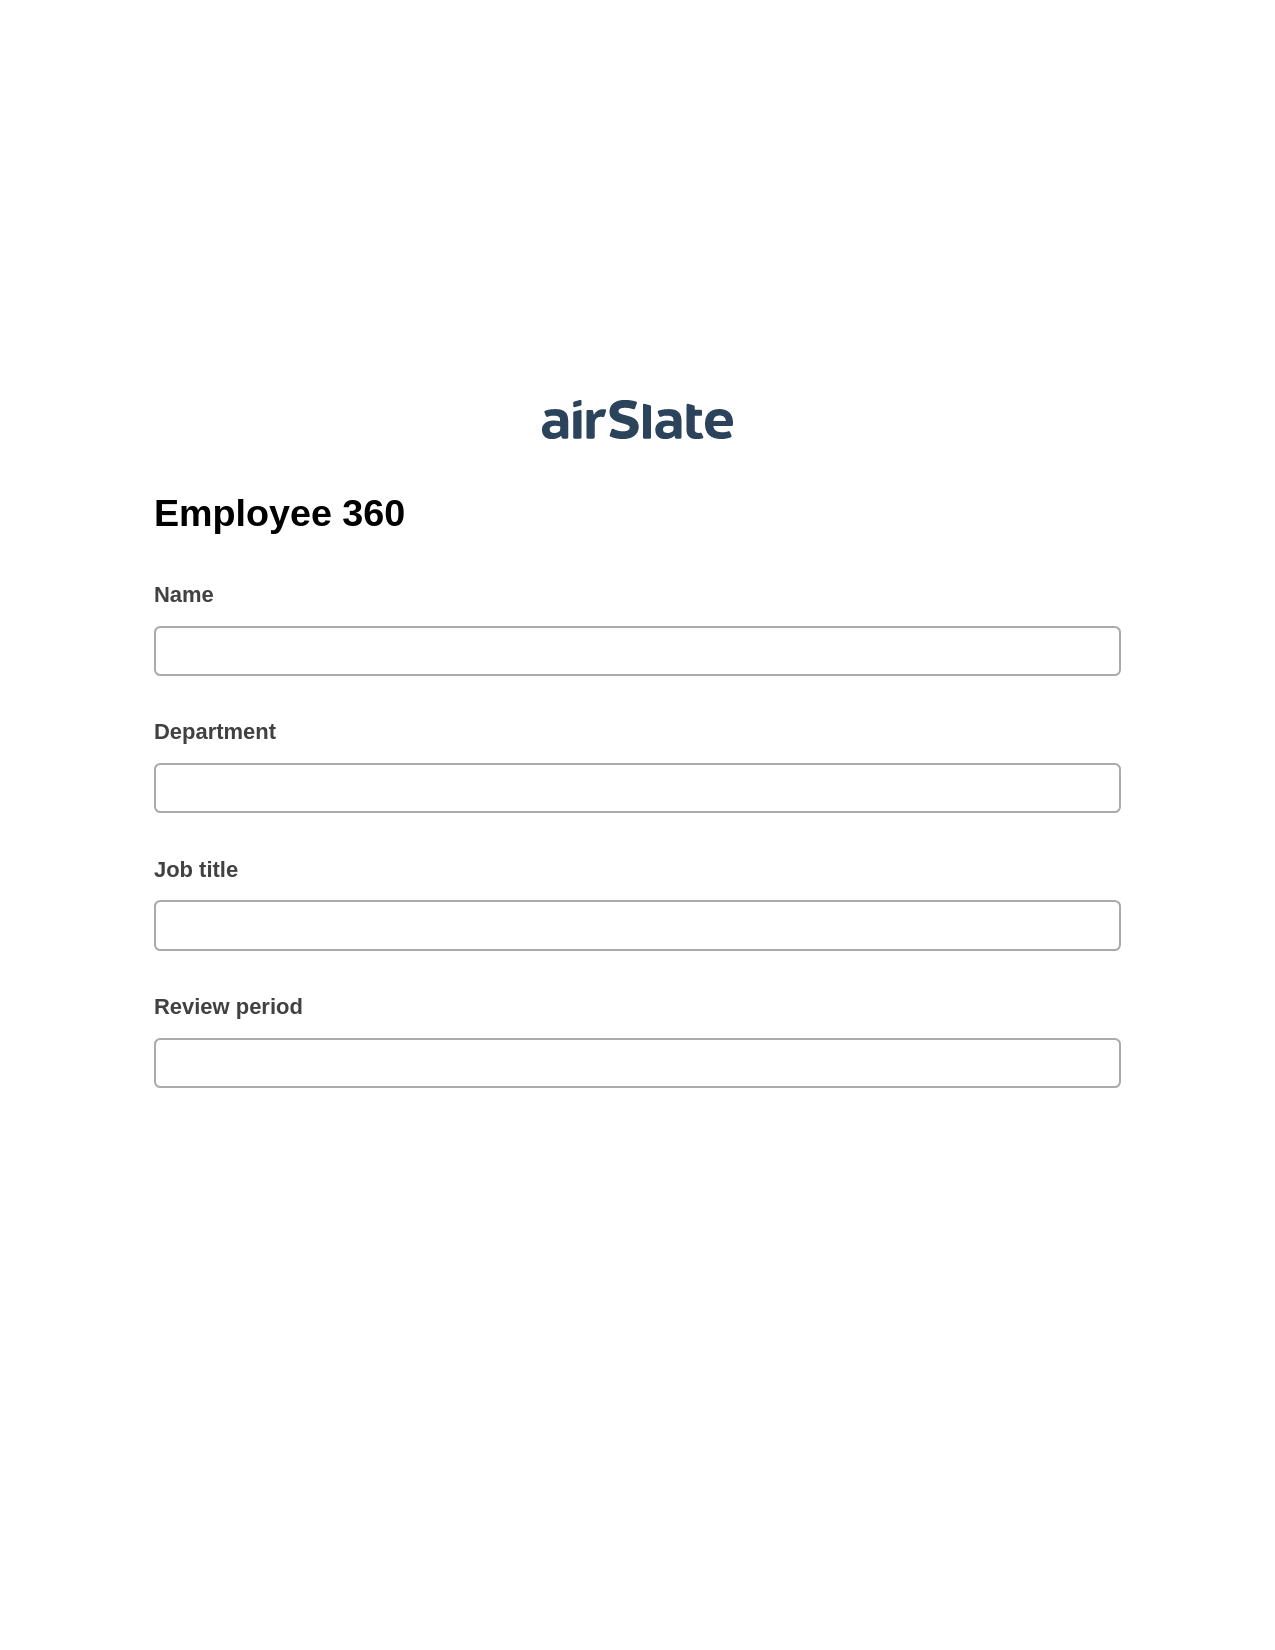 Employee 360 Pre-fill from MySQL Bot, Open under a Role Bot, Export to WebMerge Bot